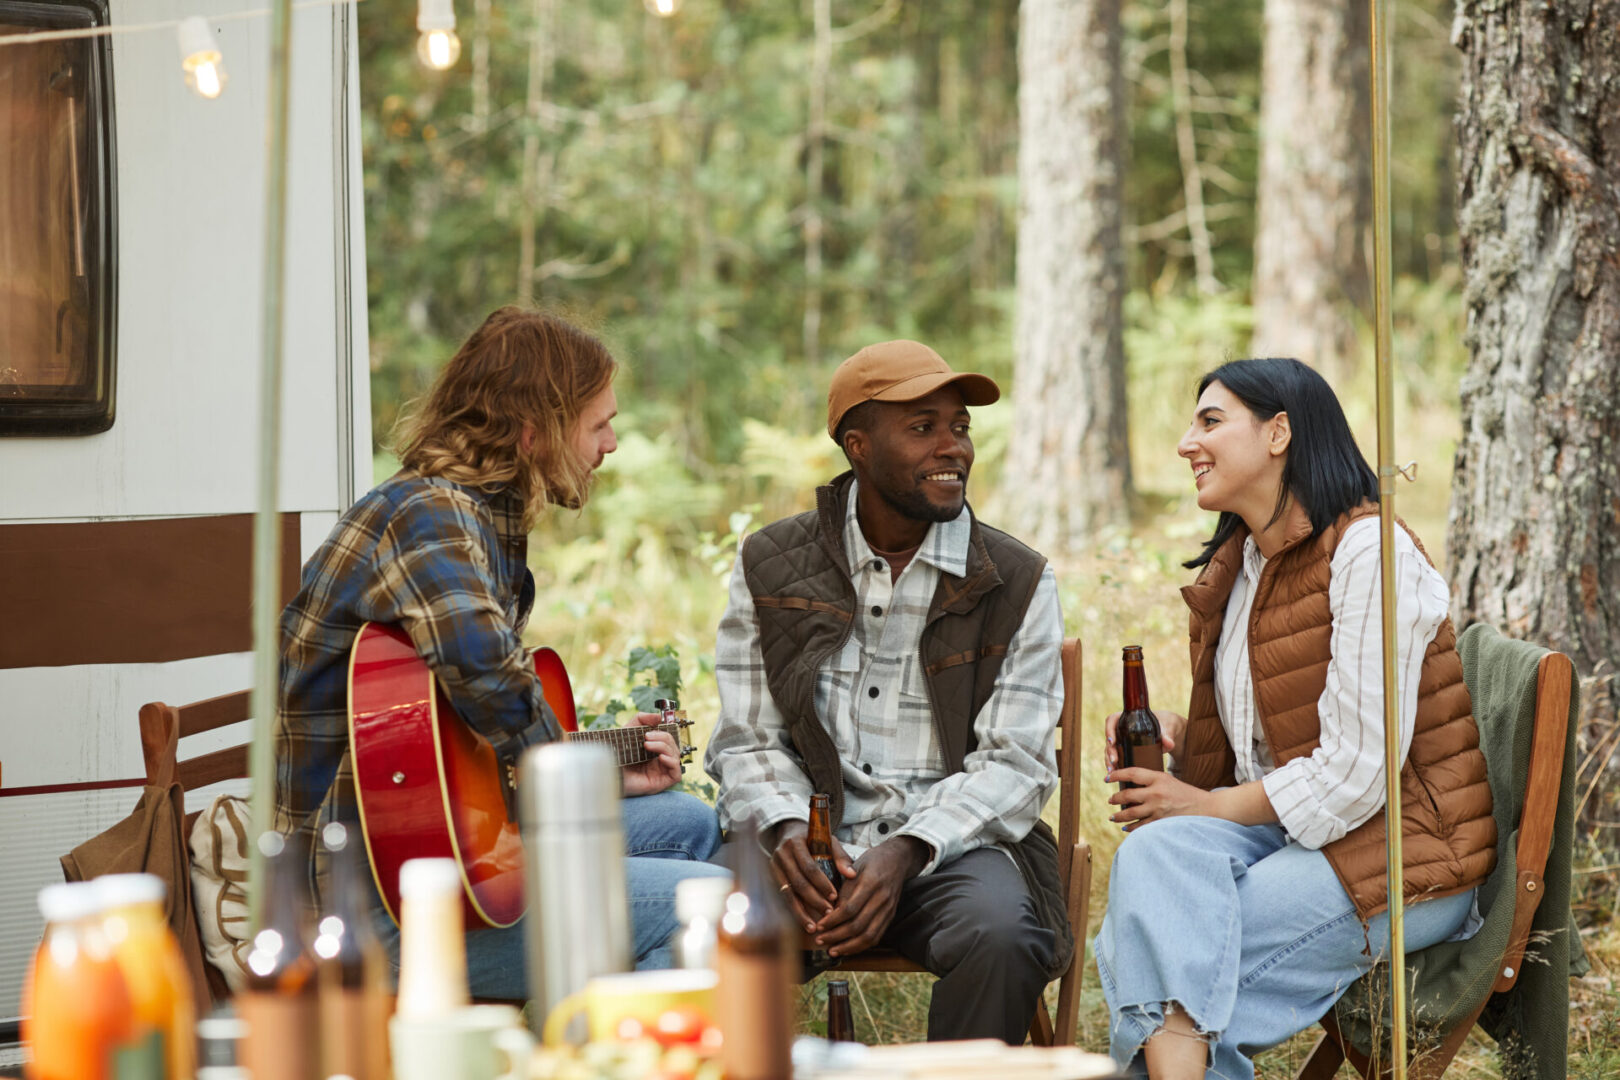 Group of three friends enjoying camping outdoors with trailer van and drinking beer